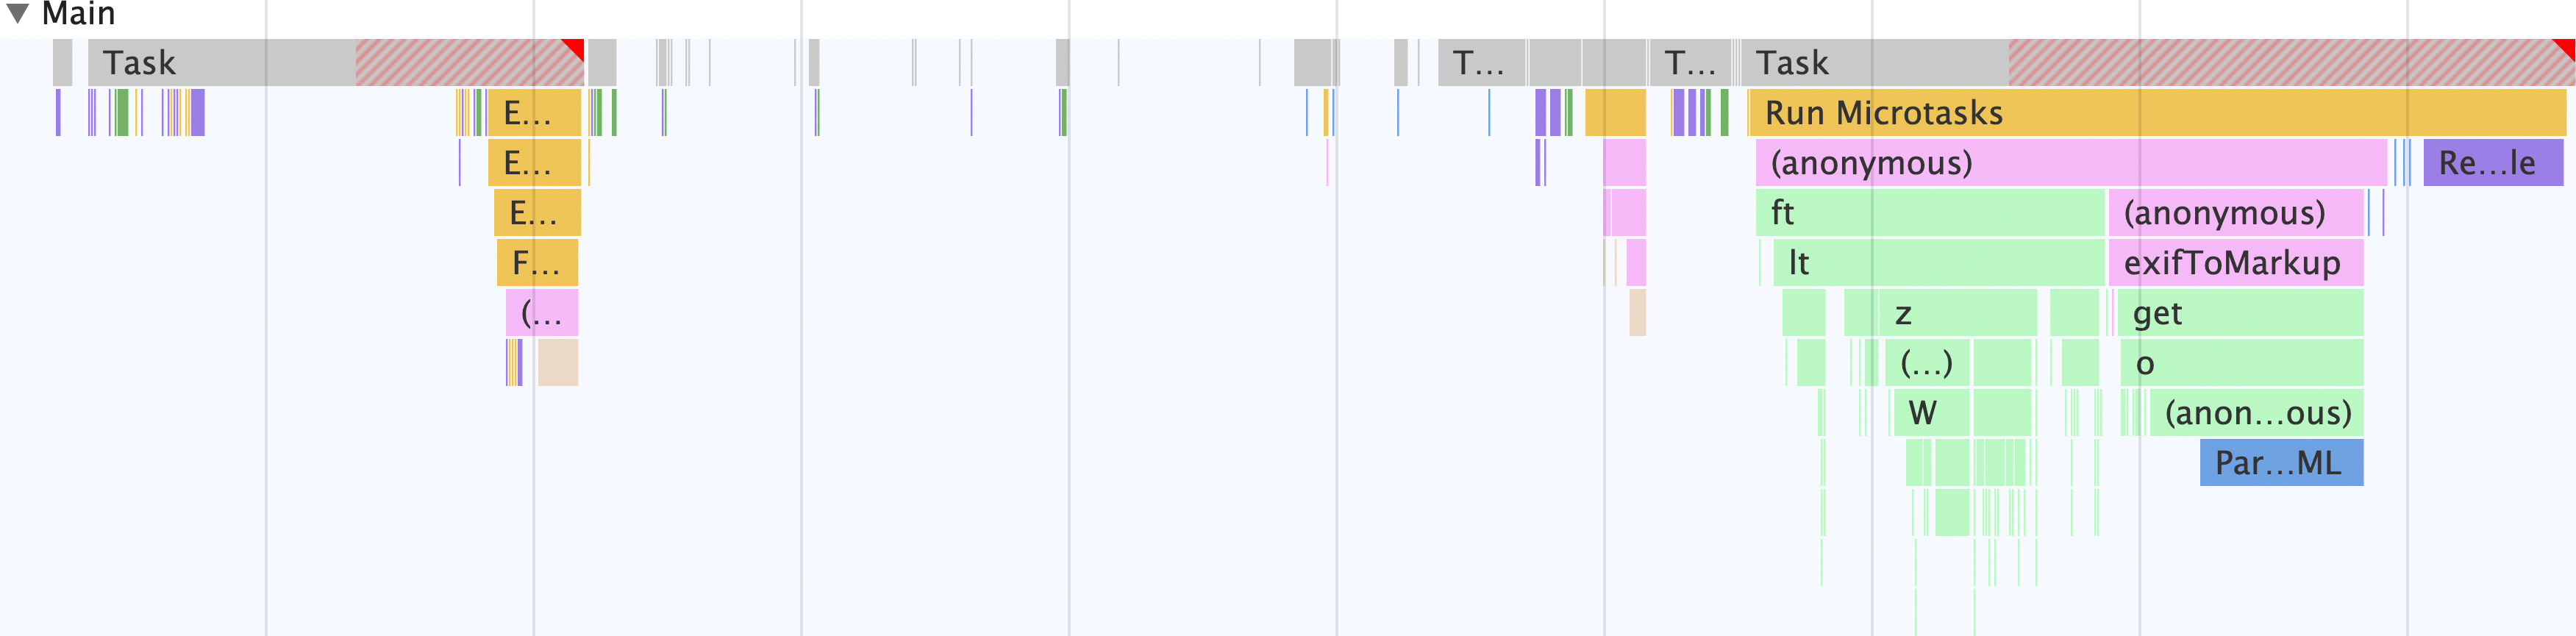 The performance profiler showing the image metadata extractor app's activity occurring entirely on the main thread. The there are two substantial long tasks—one that runs a fetch to get the requested image and decode it, and another that extracts the metadata from the image.